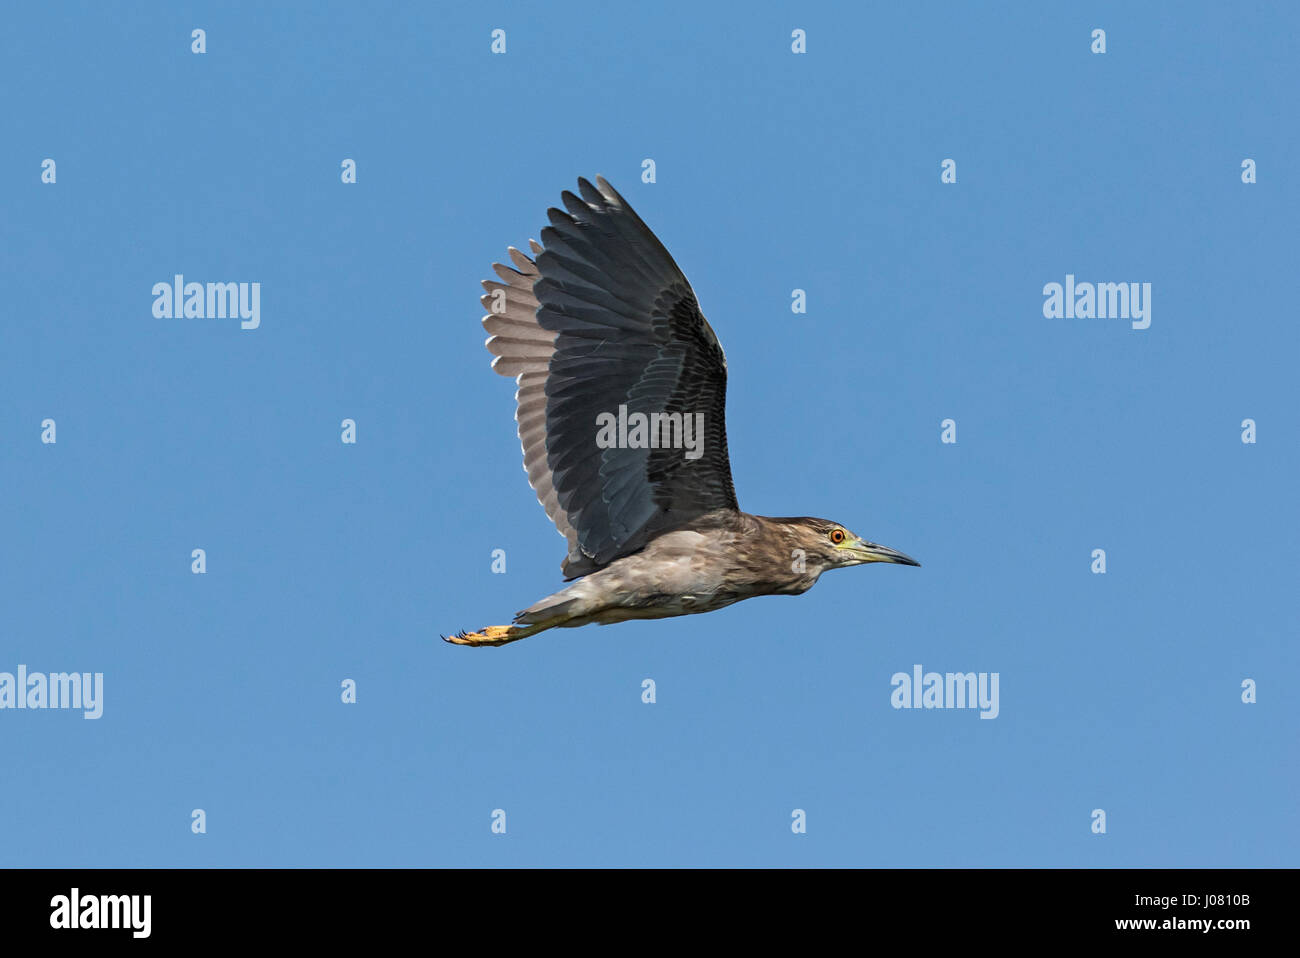 Black-crowned Night Heron (Nycticorax nycticorax) juvenile in flight, Prek Toal, Tonle Sap, Cambodia Stock Photo